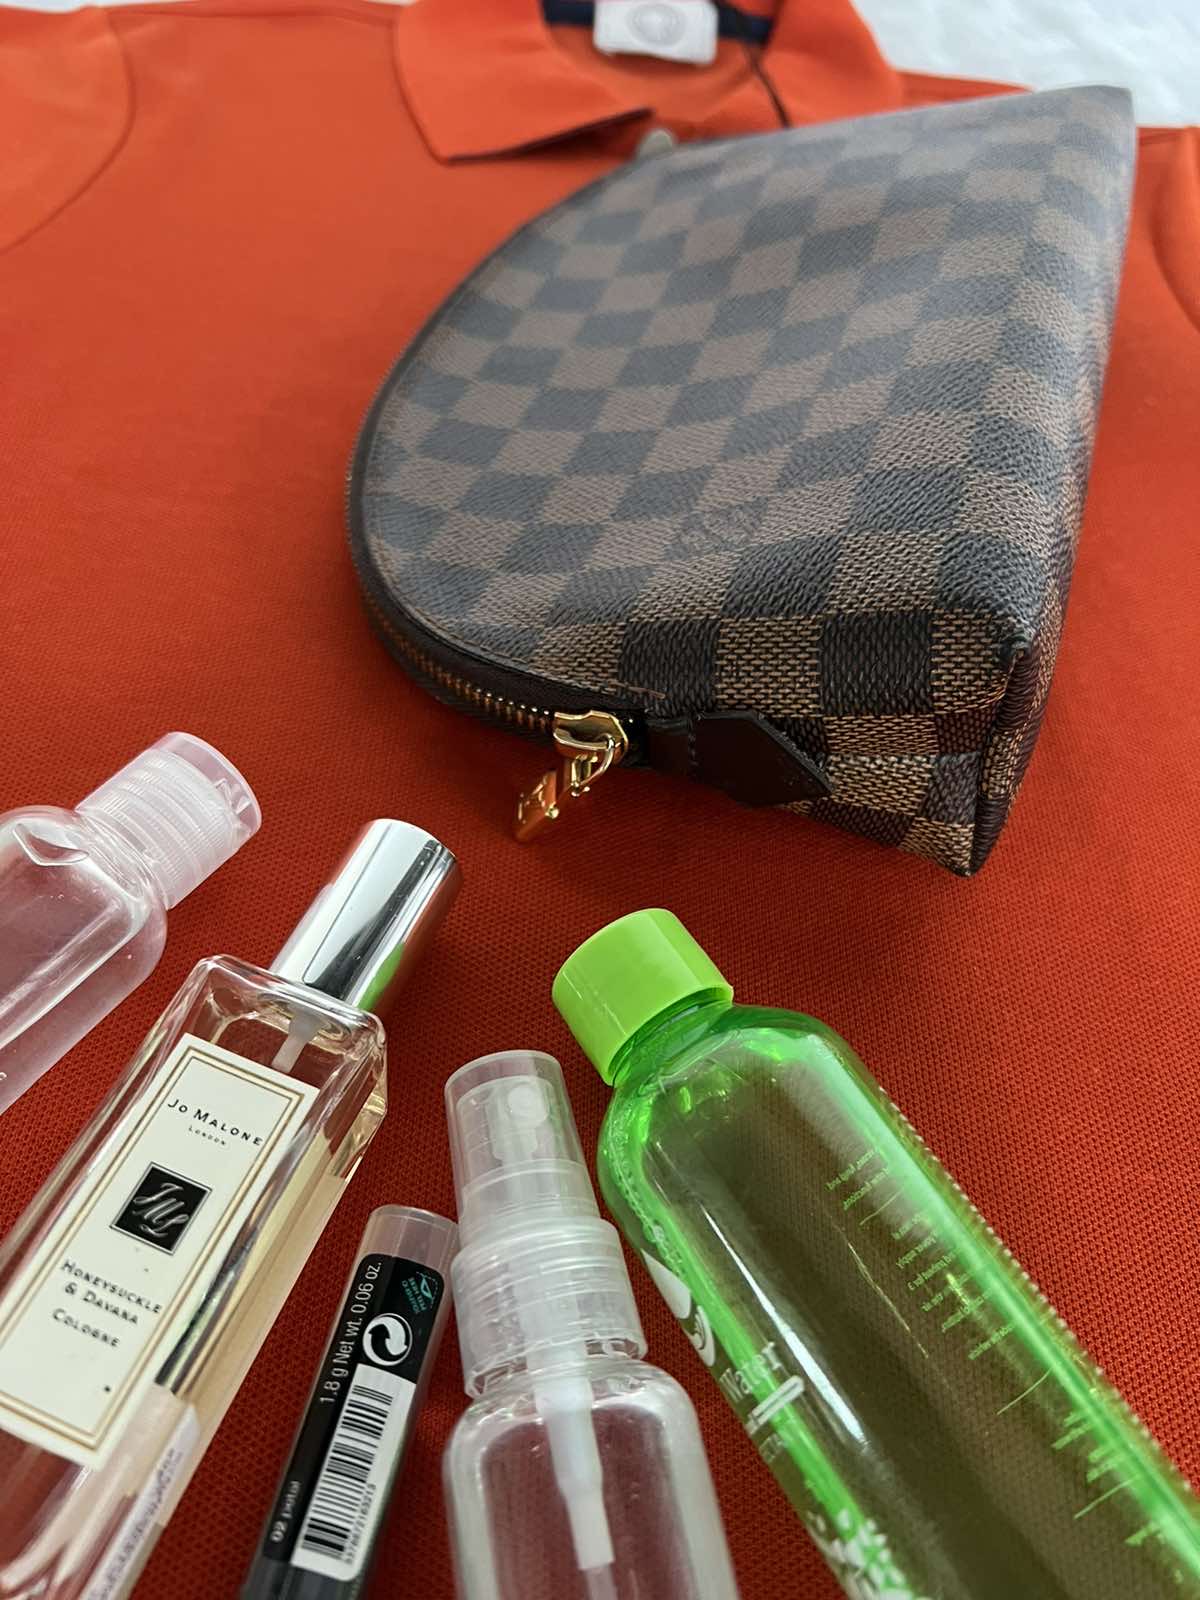 SOLD/LAYAWAY💕 Louis Vuitton Damier Ebene Cosmetic Pouch GM. Made in  France. No inclusions ❤️ - Canon E-Bags Prime